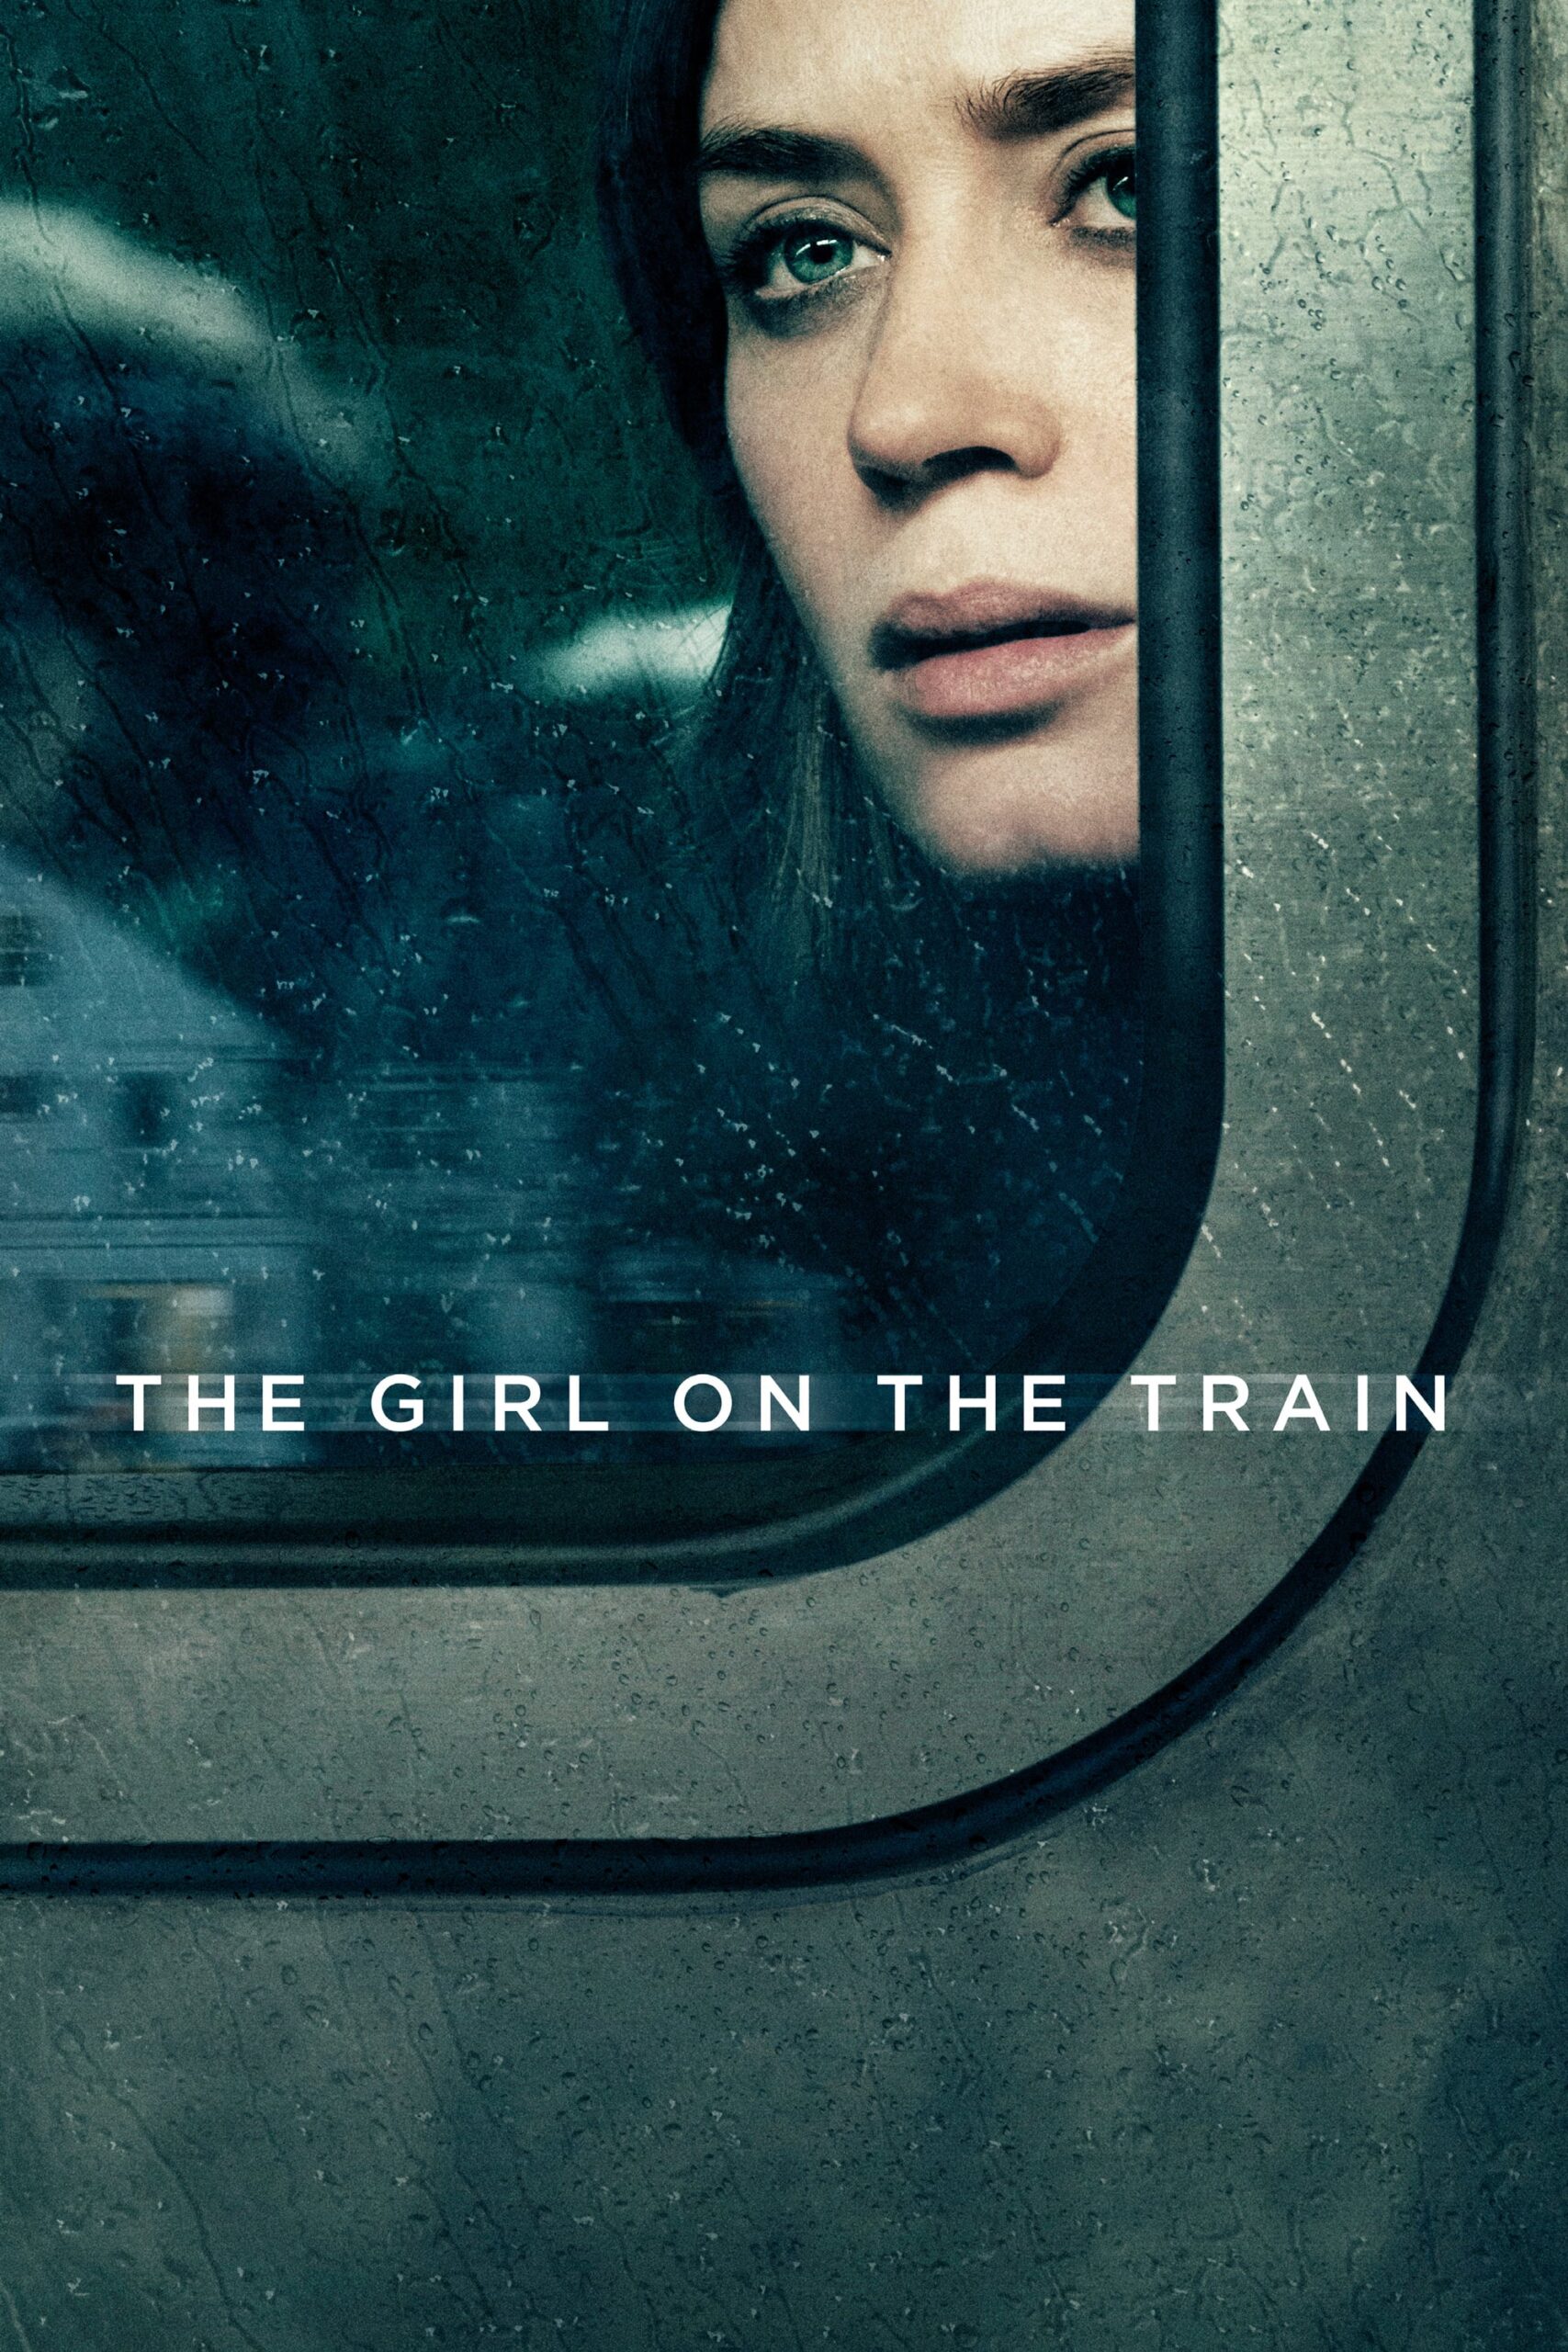 Poster for the movie "The Girl on the Train"